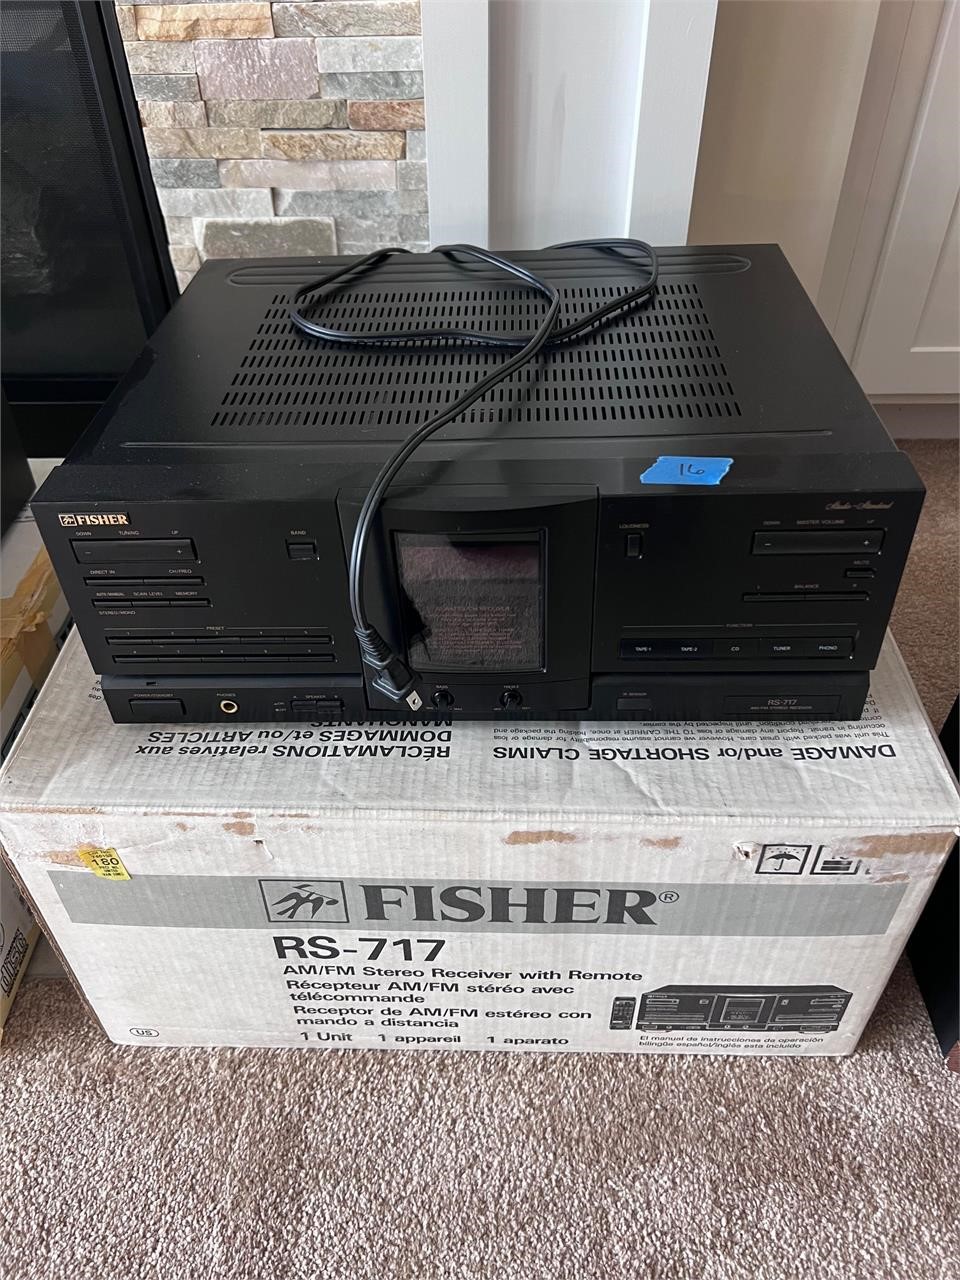 Fisher Brand Receiver